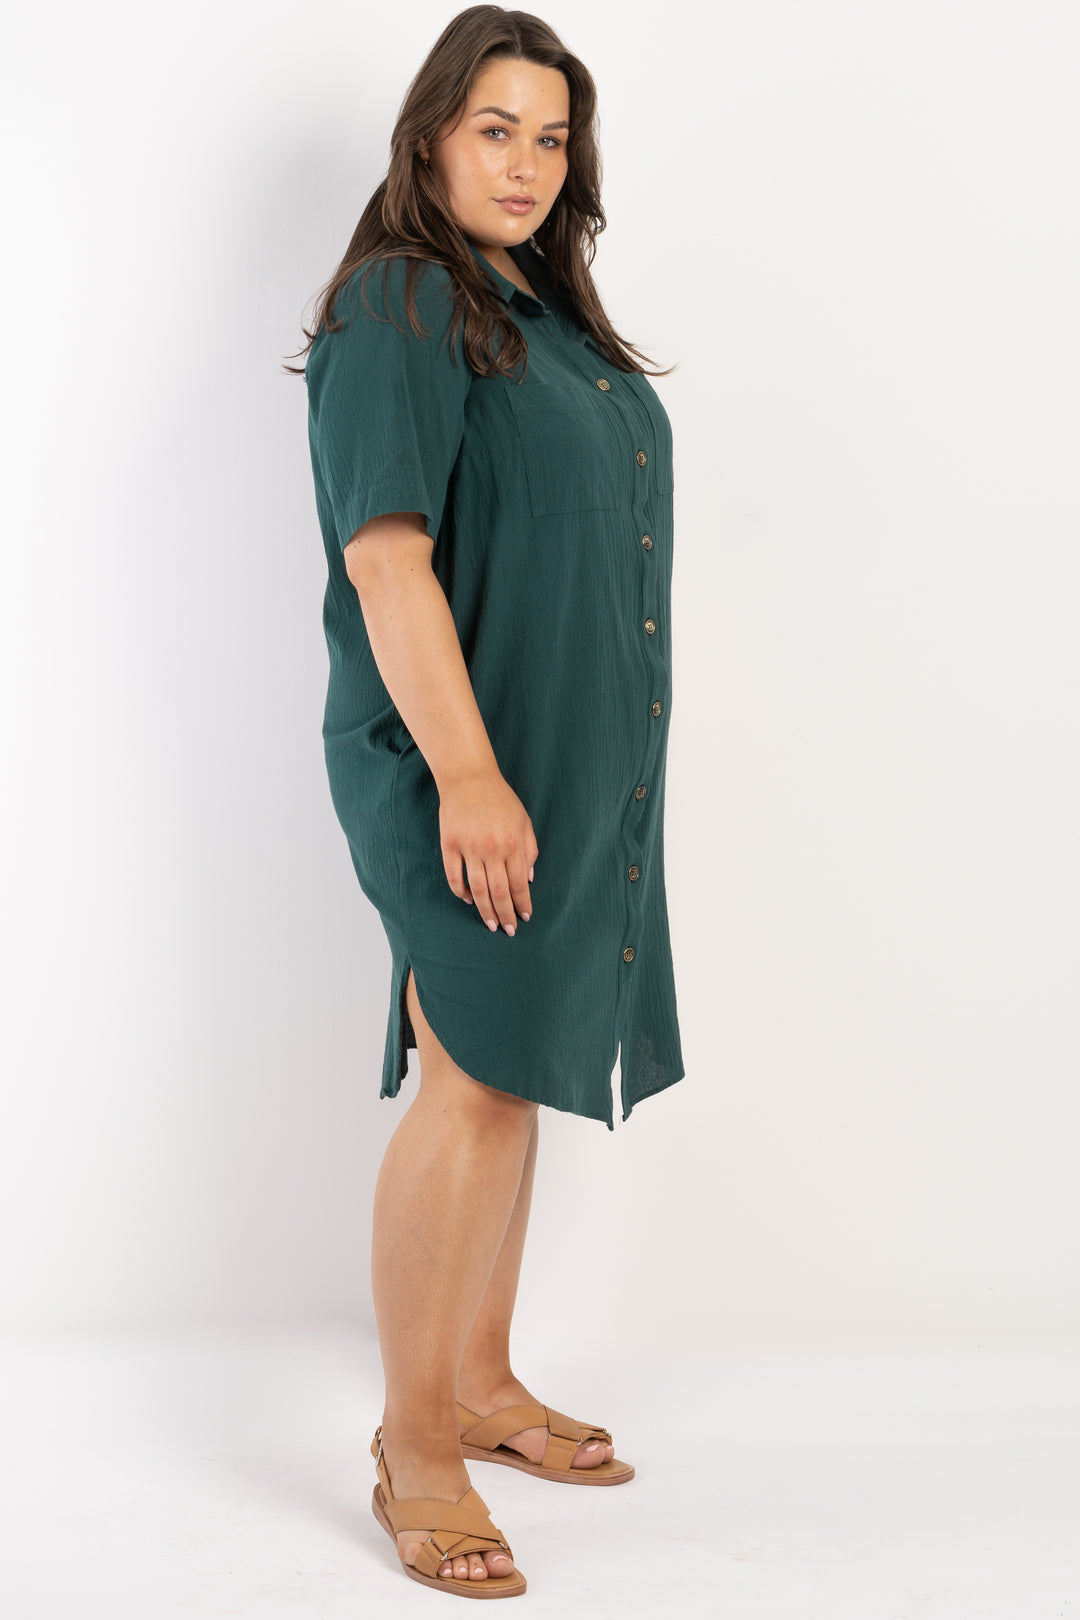 It's Alright Linen Short Sleeve Dress - Green - STOCK AVAILABLE - S (14/16)